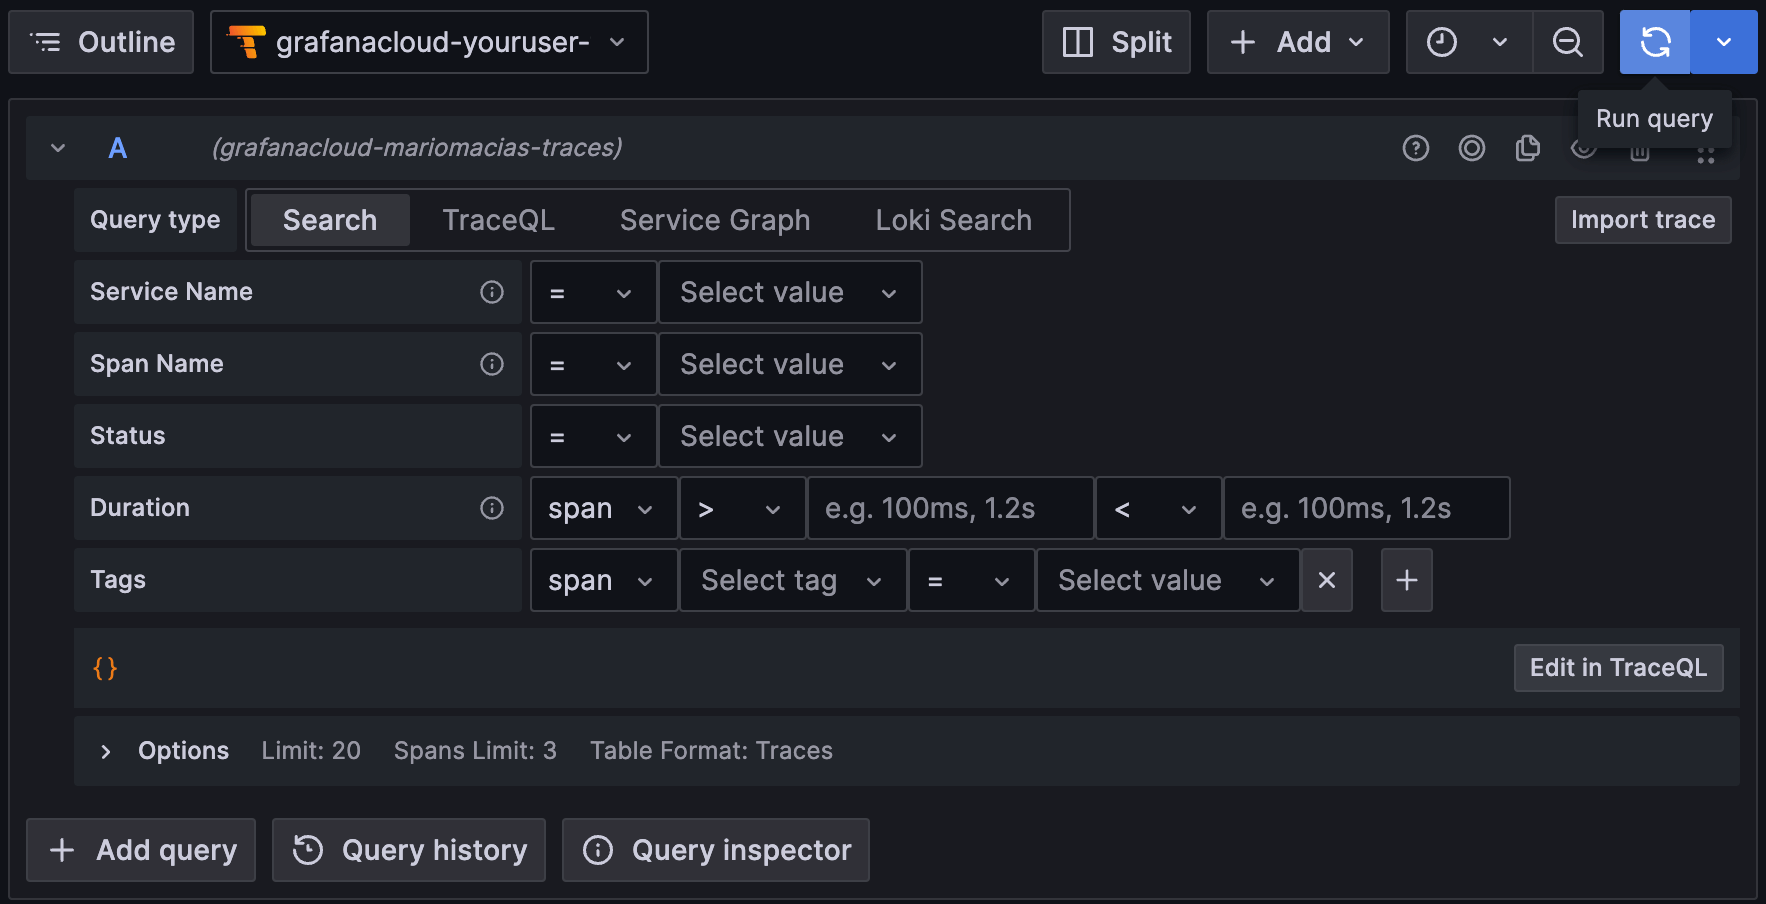 Select Run query to search for all traces. 